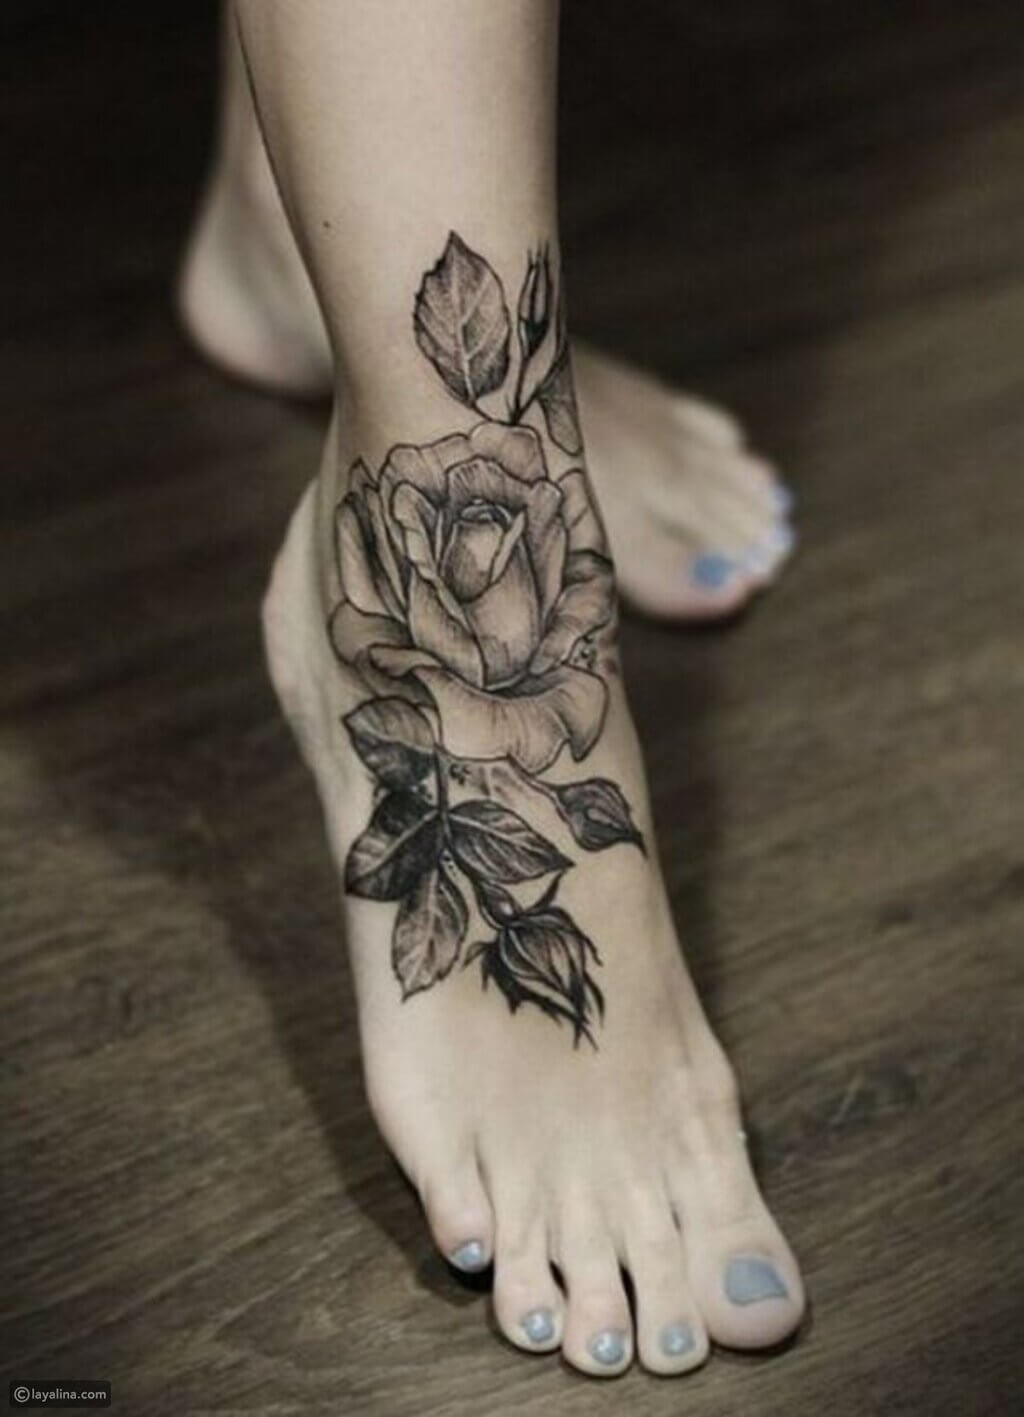 Top more than 156 family foot tattoos